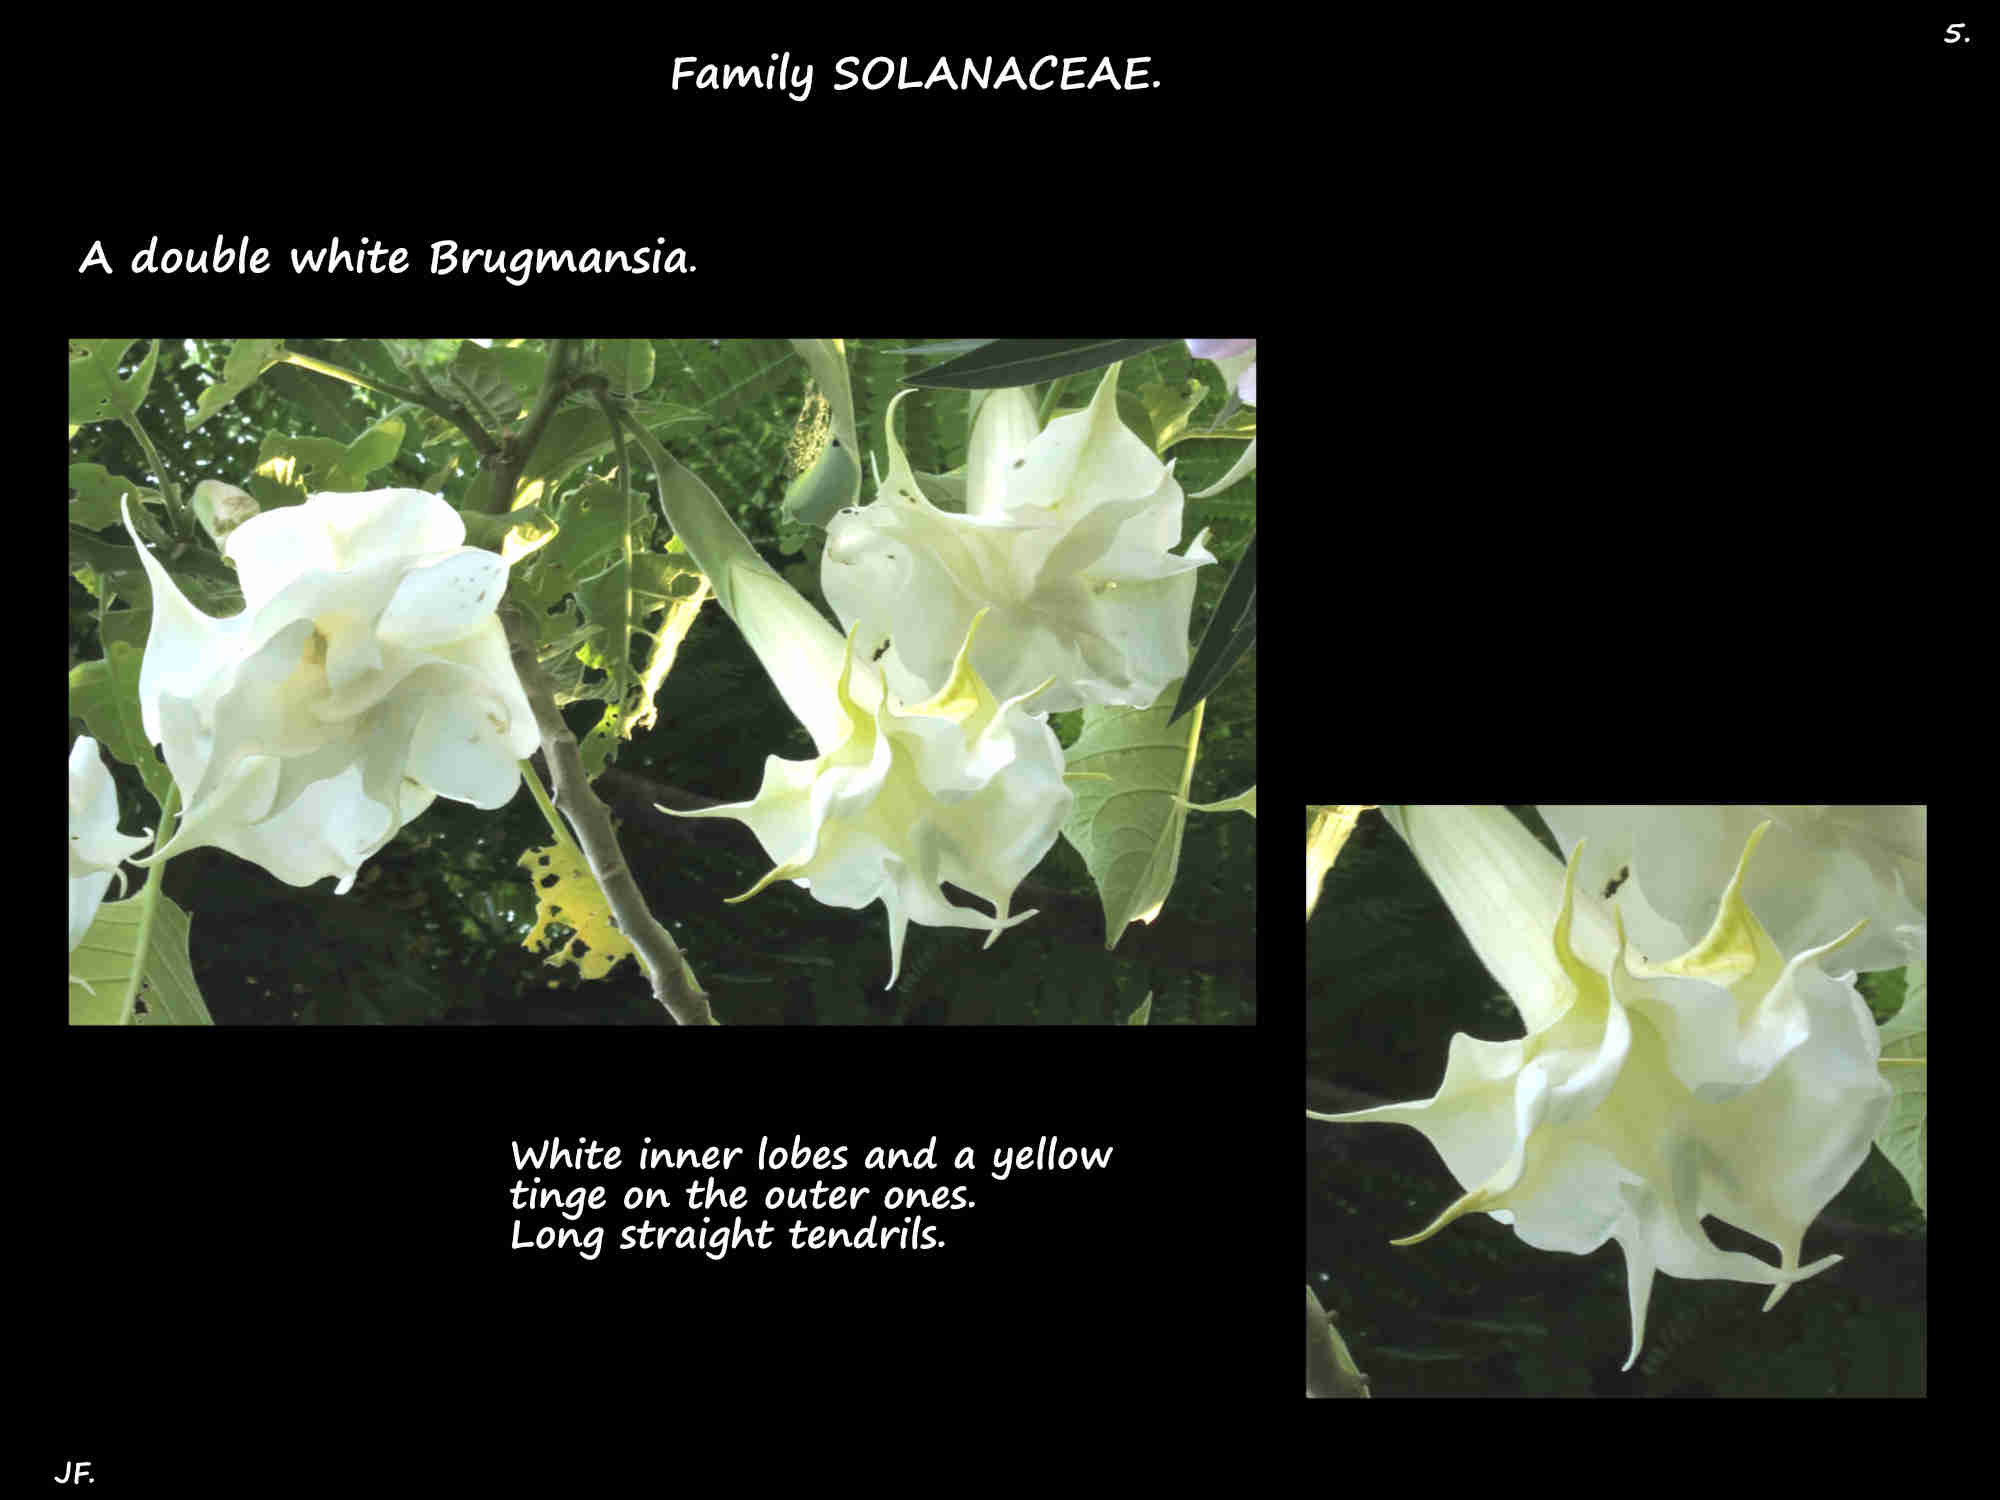 5 A double white Brugmansia